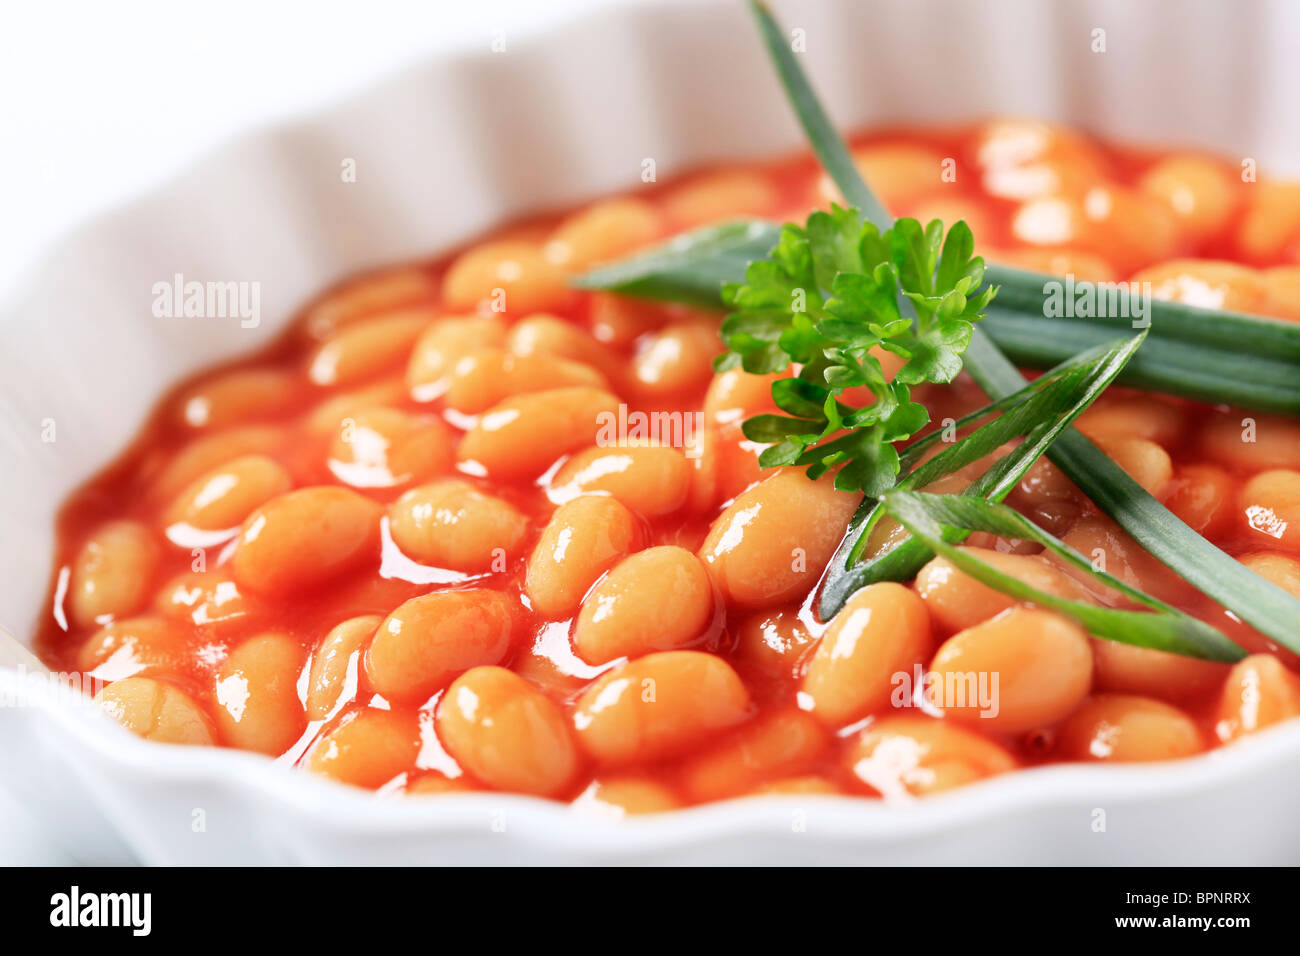 Baked beans in a porcelain casserole dish Stock Photo